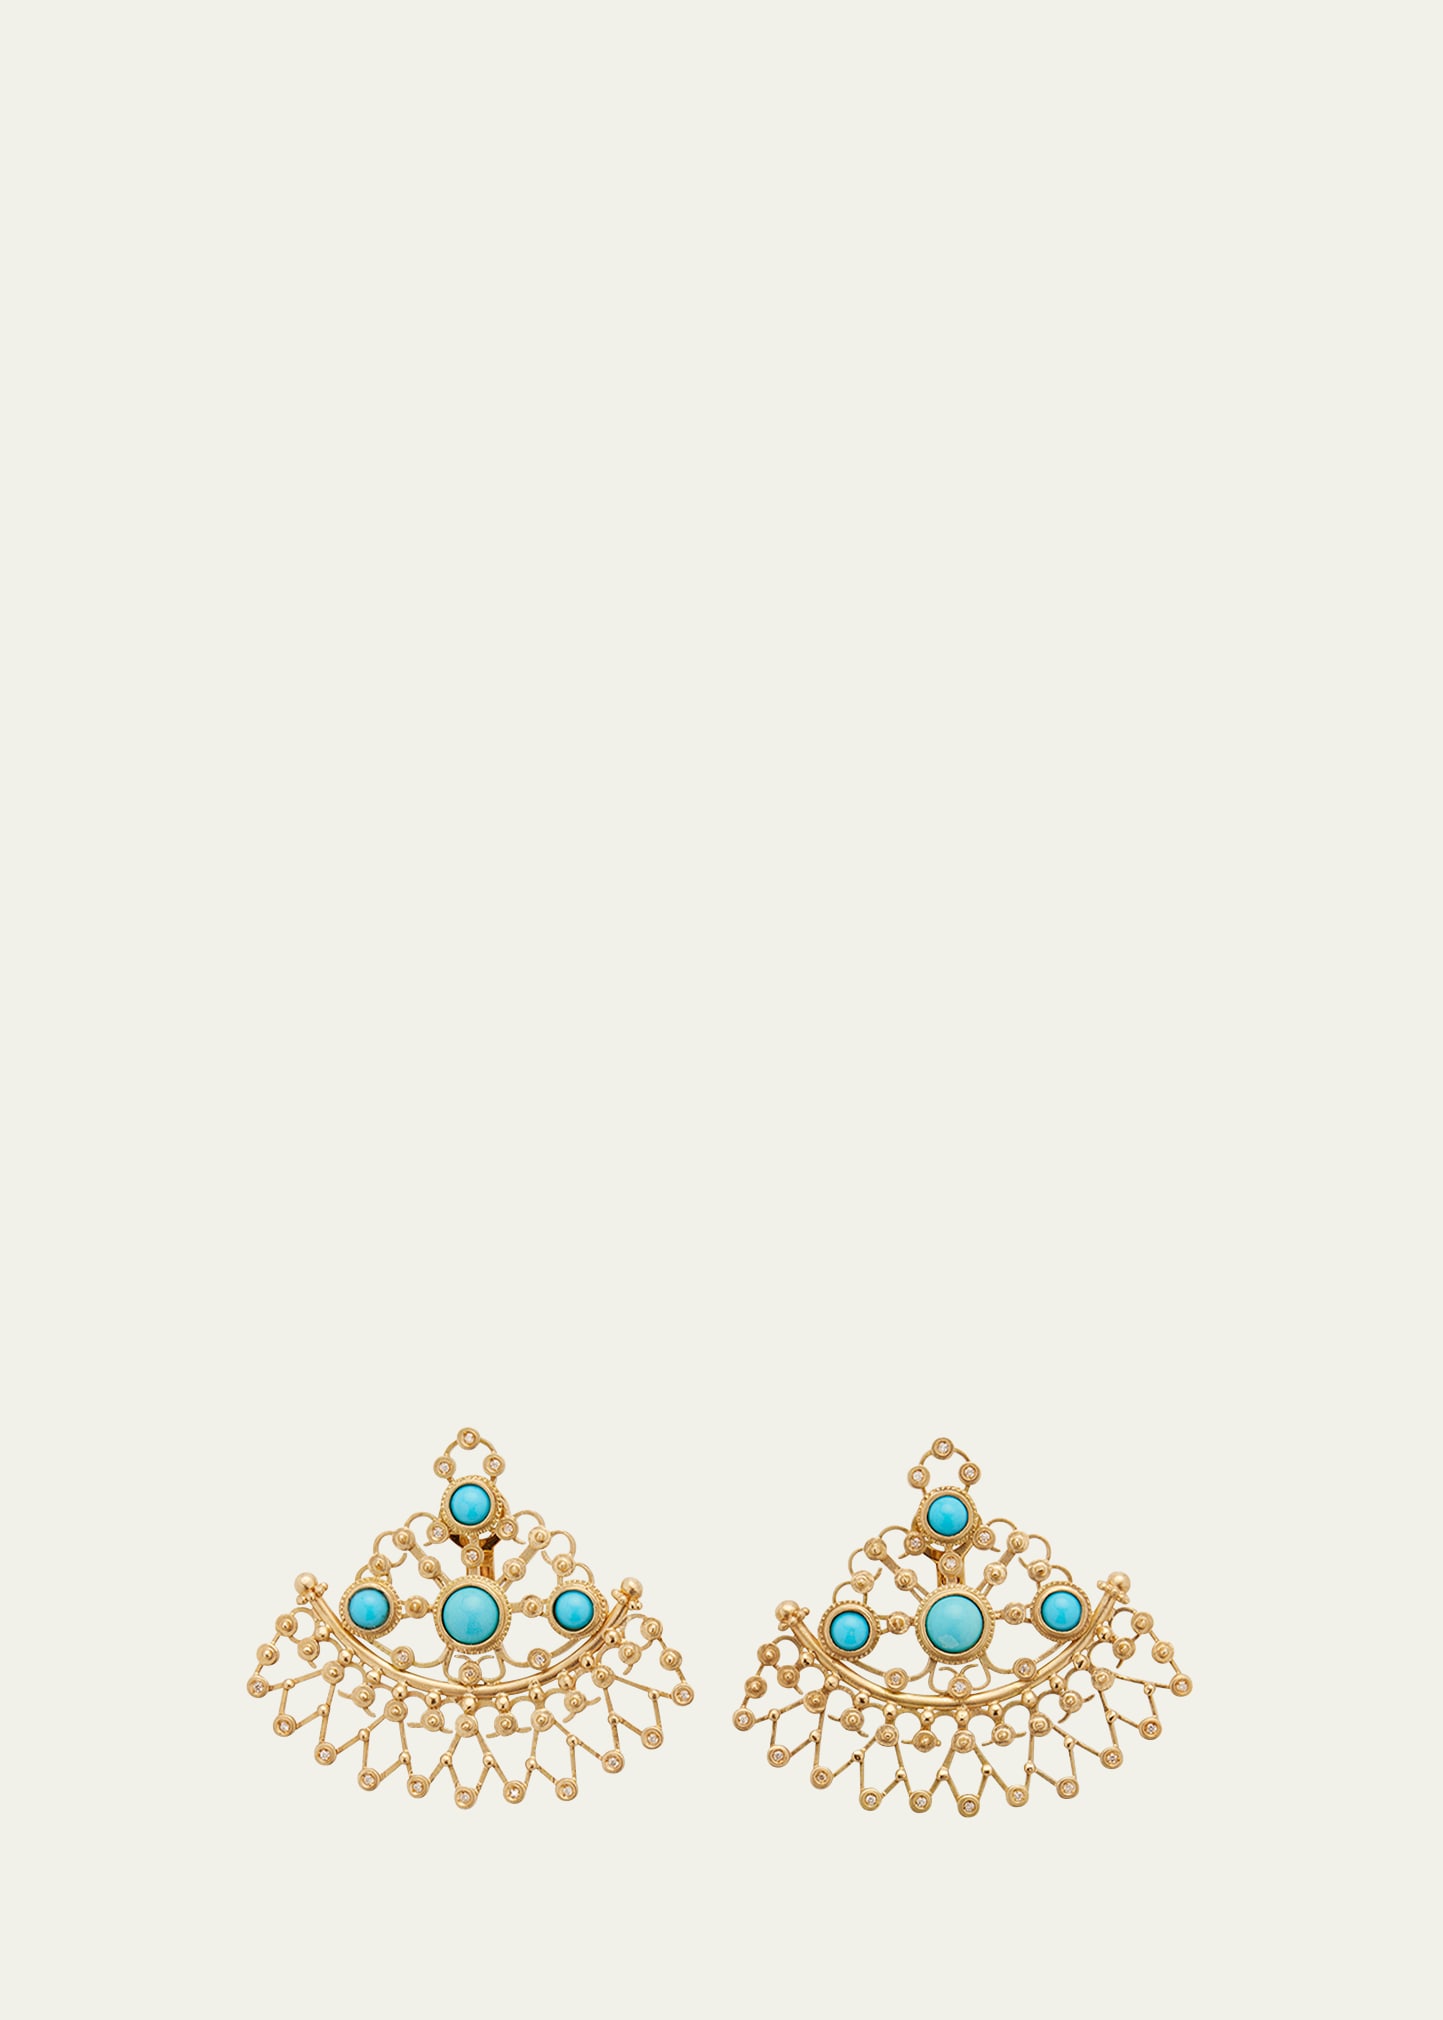 Silk Road Earrings with Diamond and Turquoise